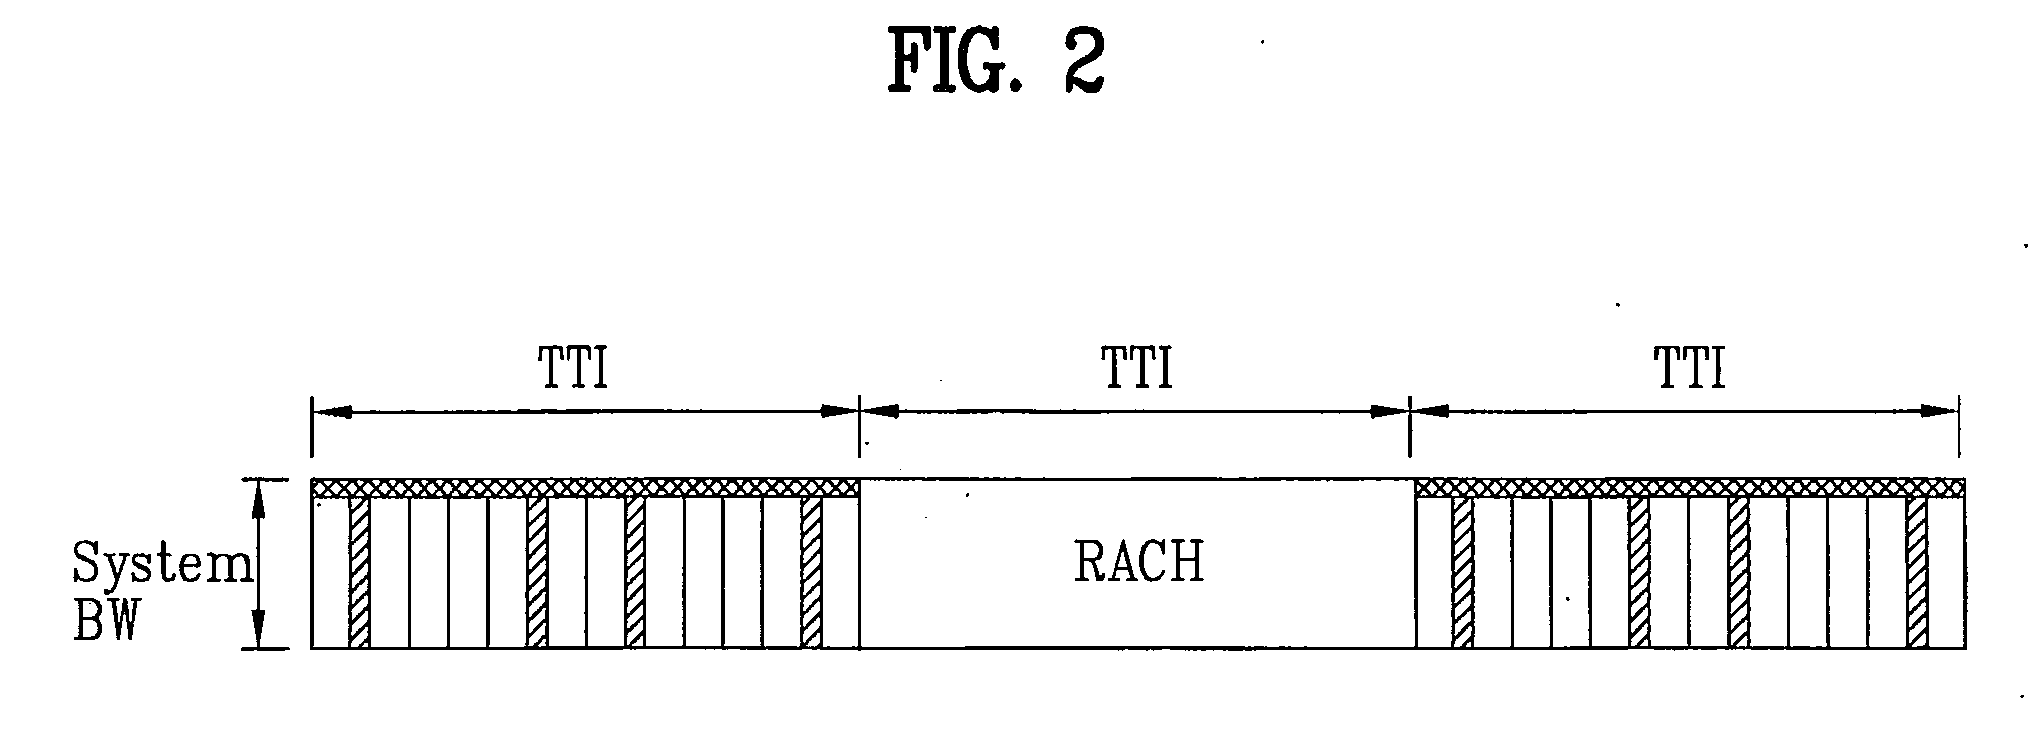 Method for transmitting control signal and method for allocating communication resource to do the same